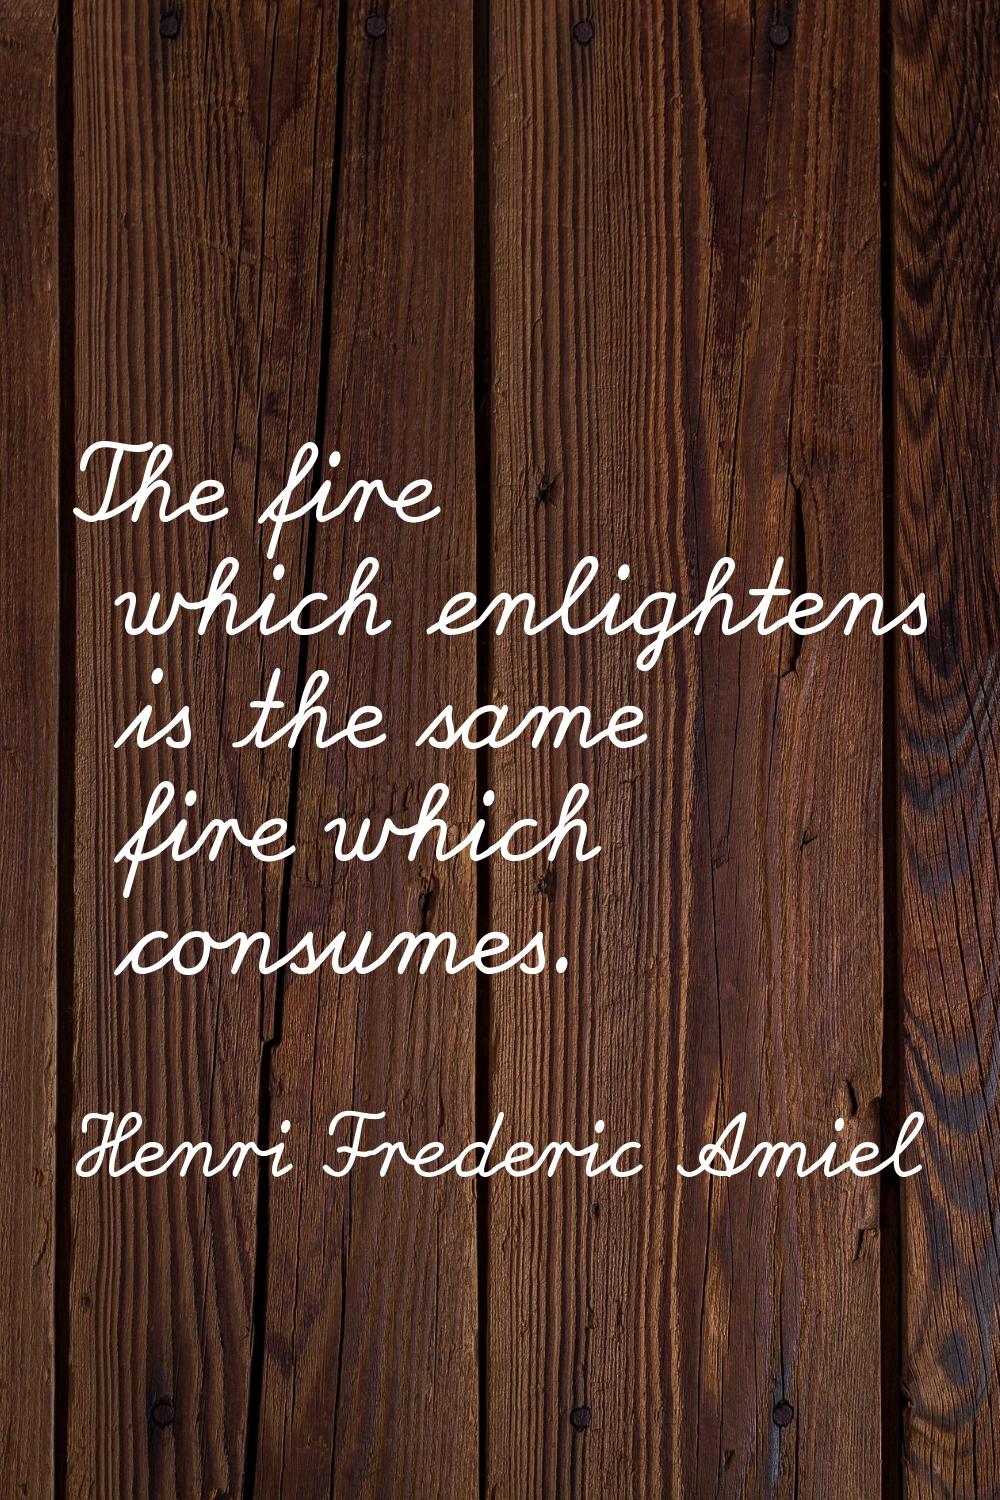 The fire which enlightens is the same fire which consumes.